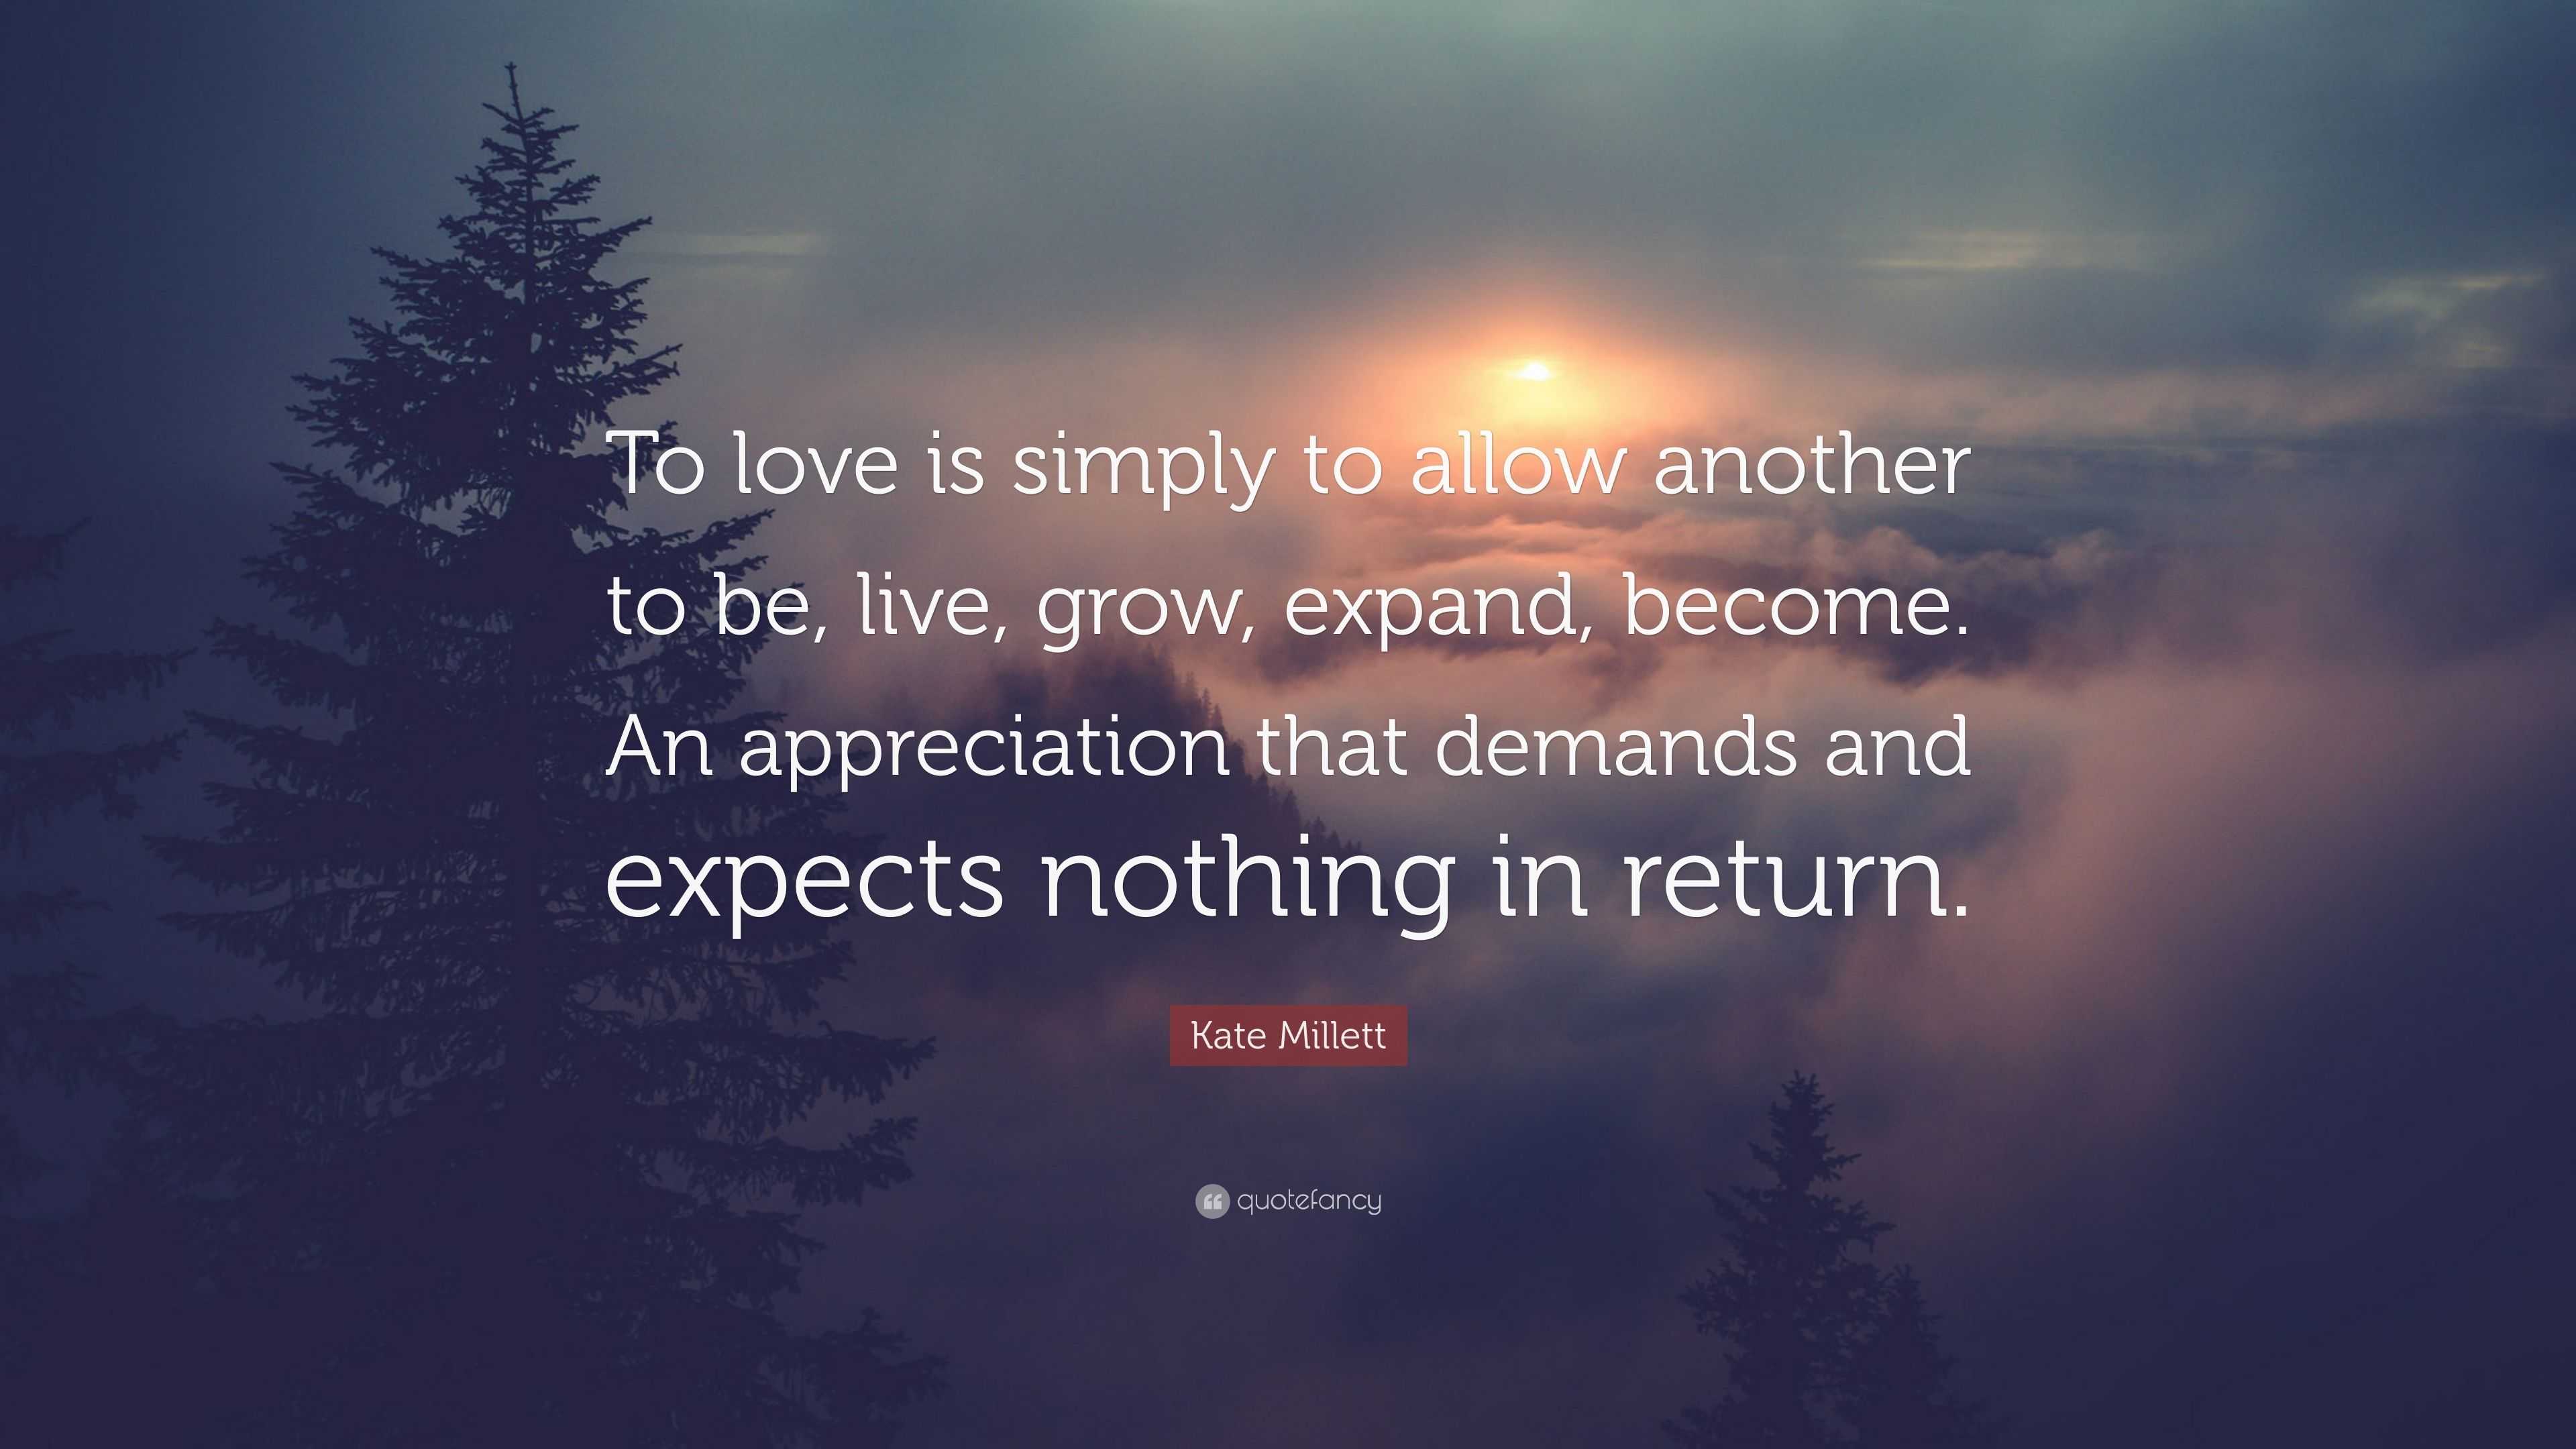 Kate Millett Quote: “To love is simply to allow another to be, live